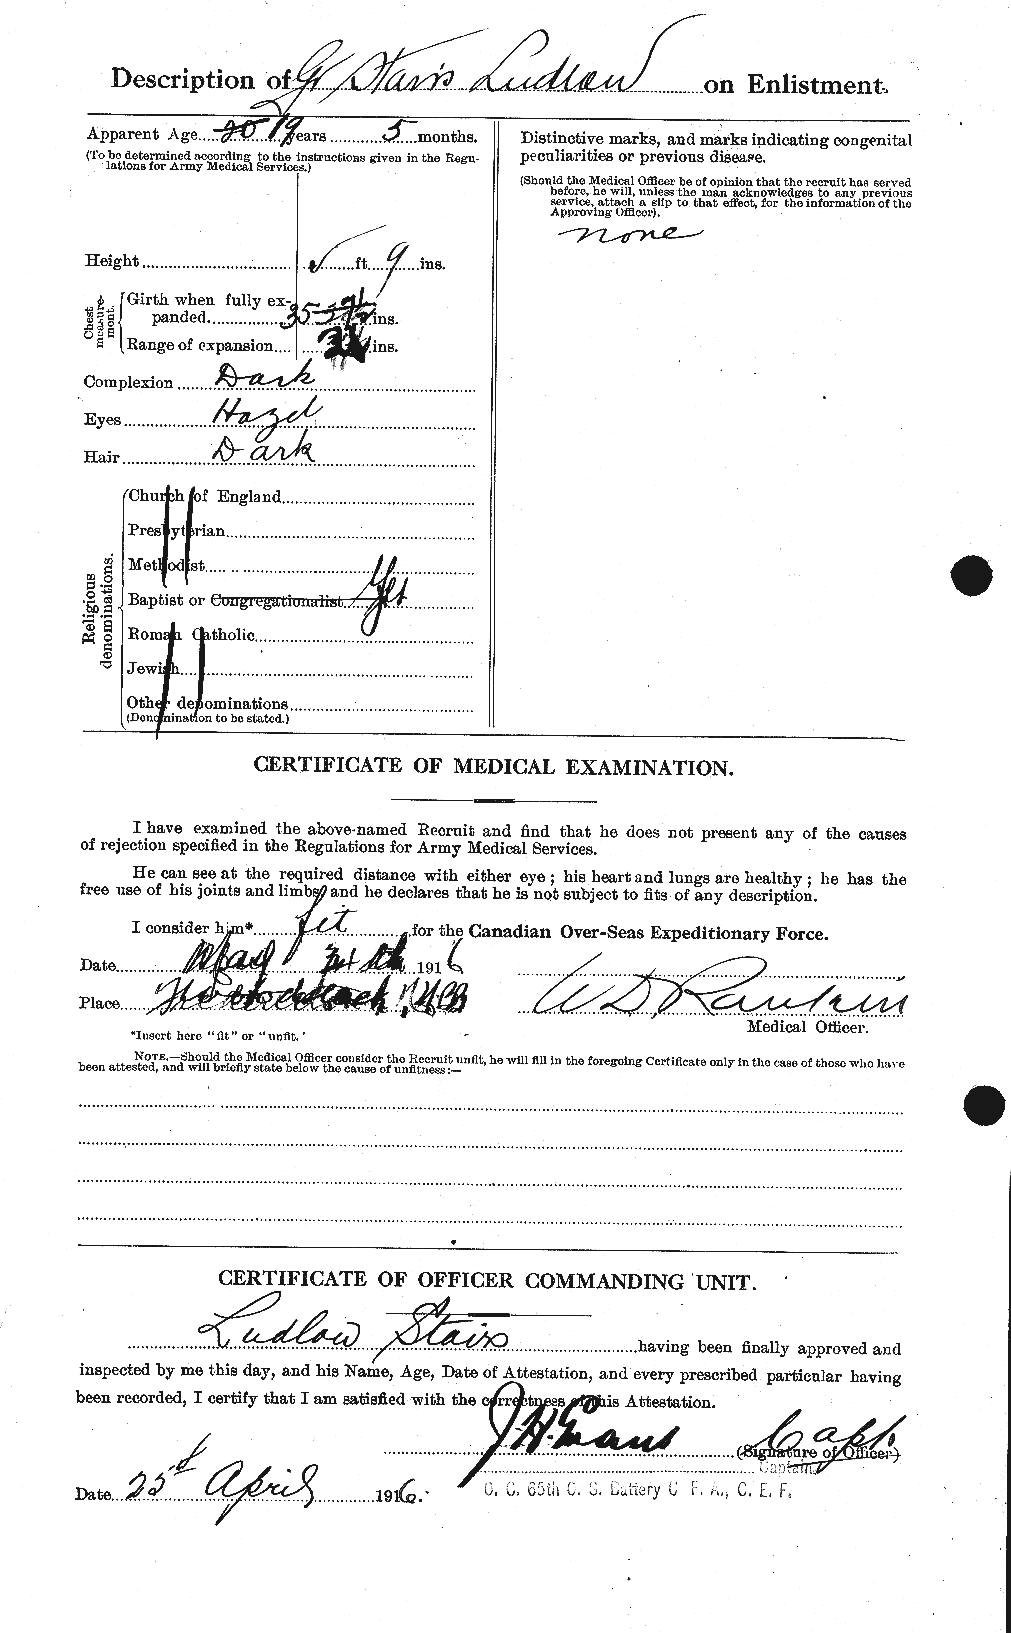 Personnel Records of the First World War - CEF 116798b